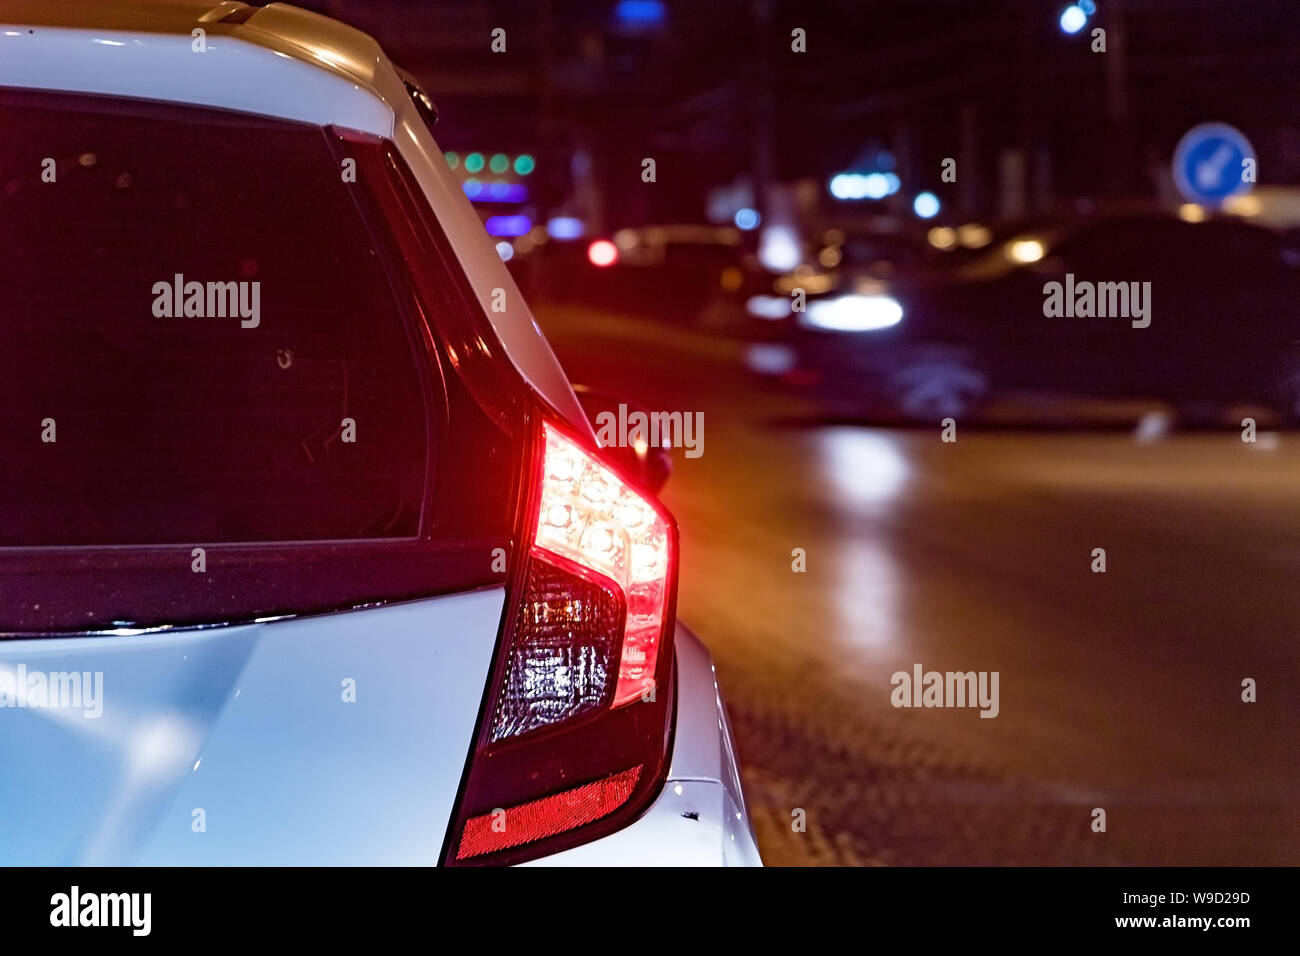 A tail-light of car at night city. A red light at the rear of a white car waiting at crossroad. Stock Photo